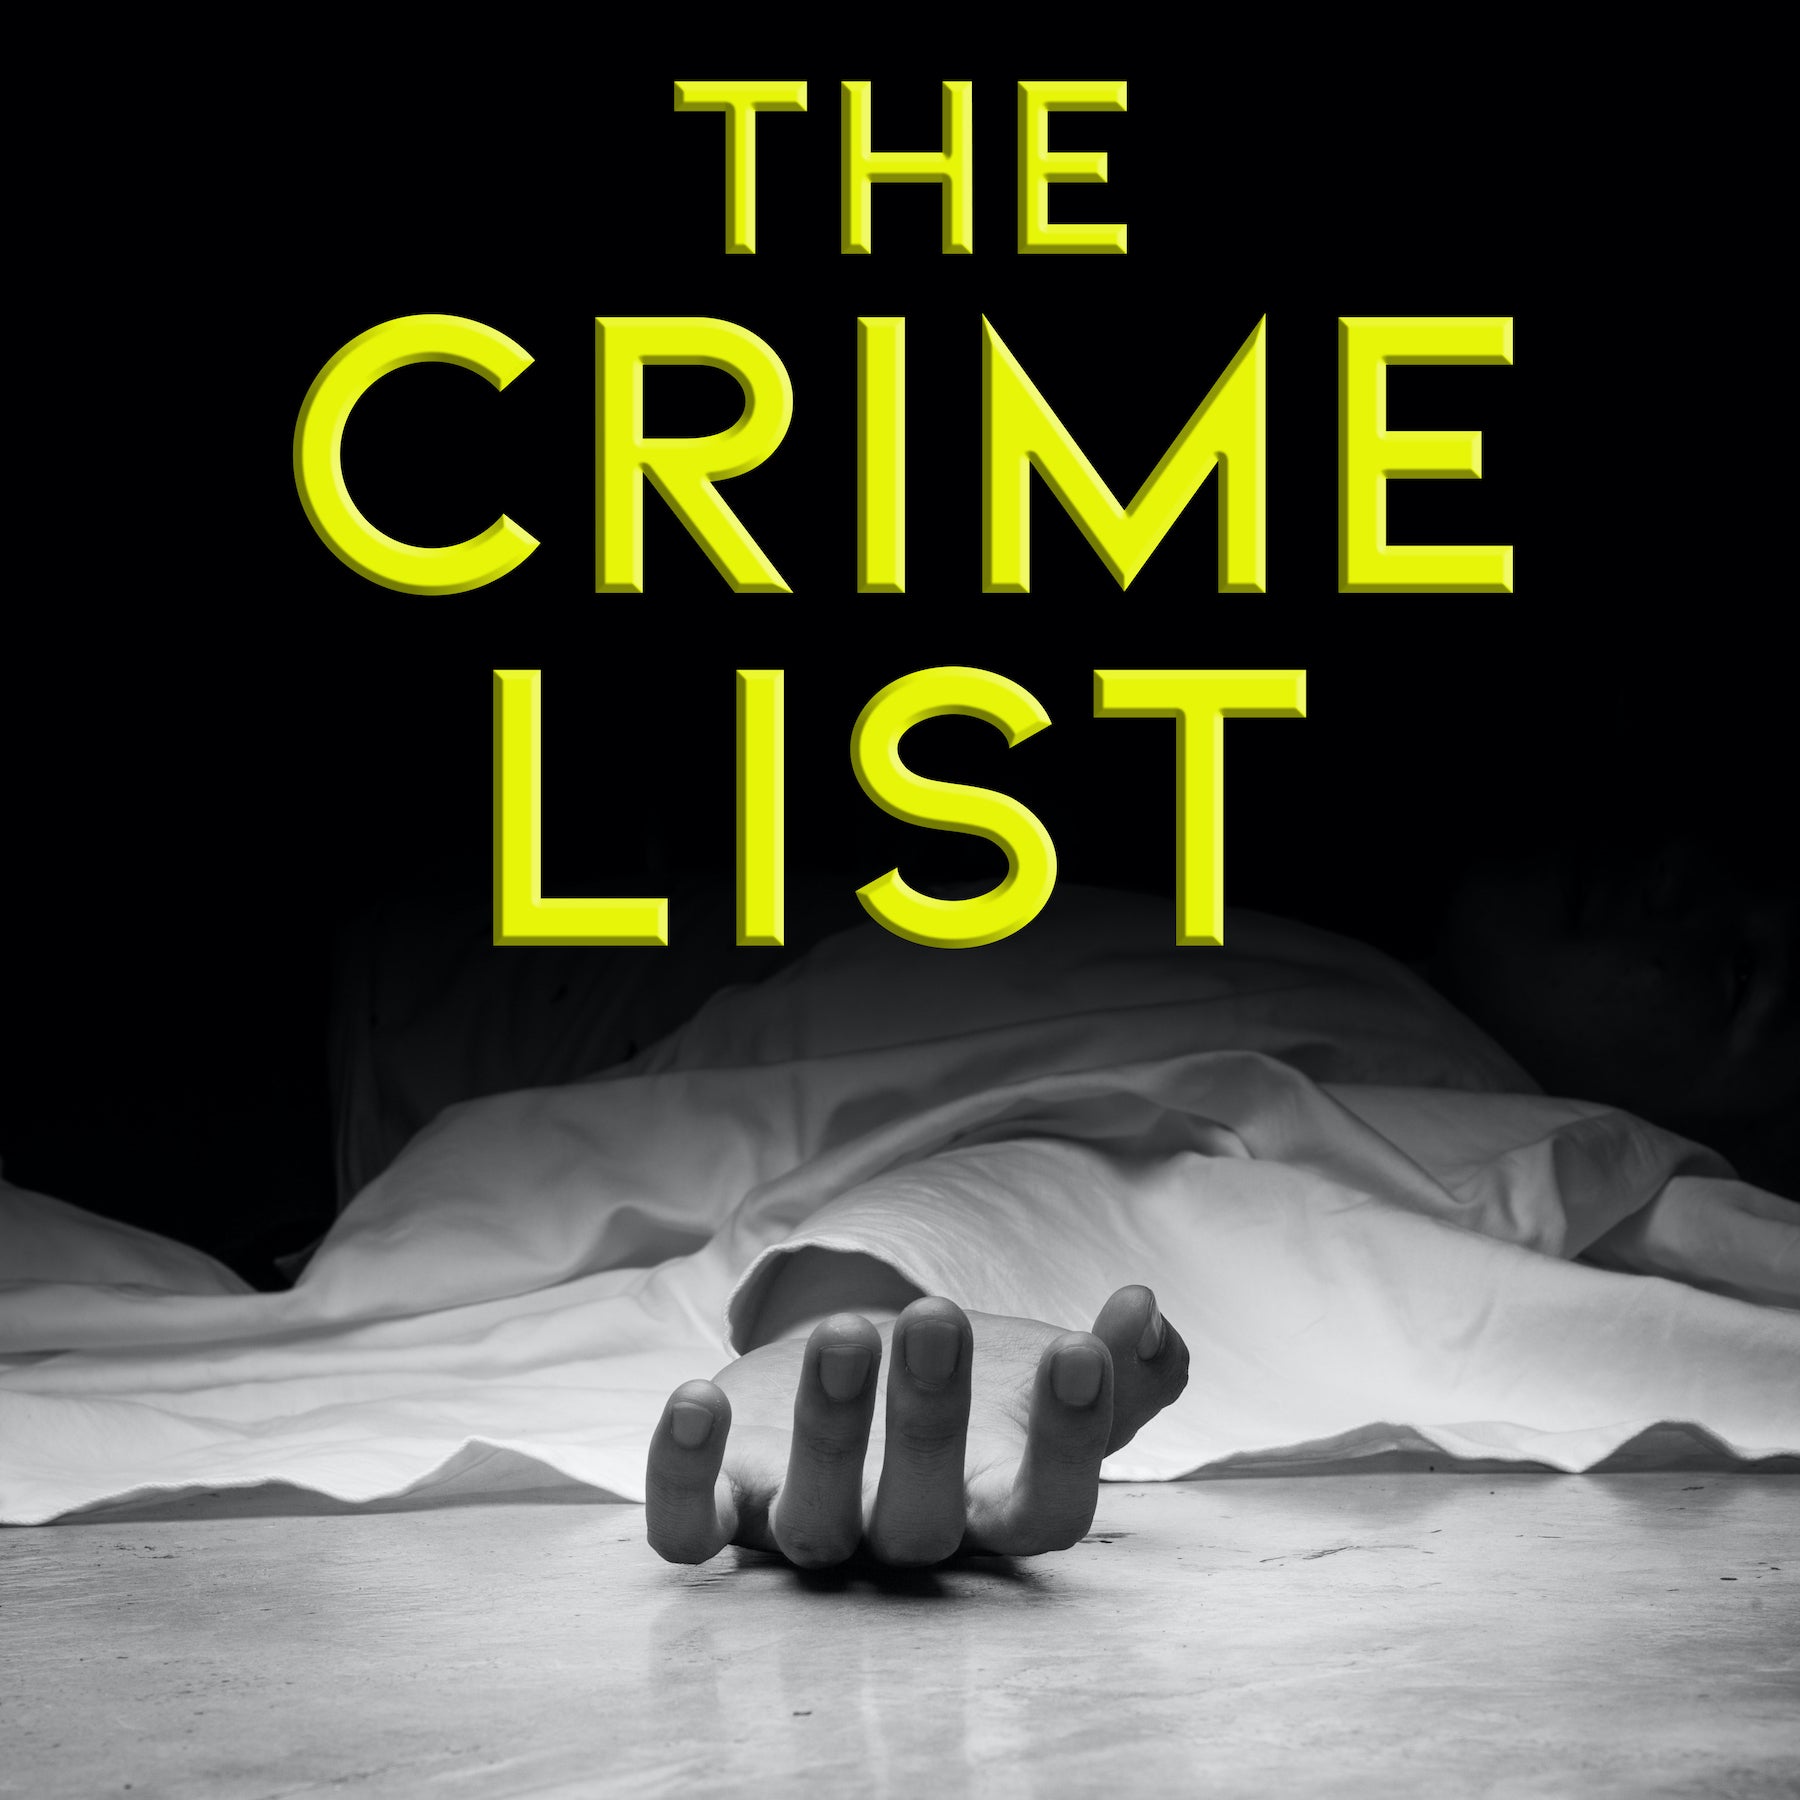 The Crime List Icon - Image of a Body Laying on the Floor Covered by a Sheet